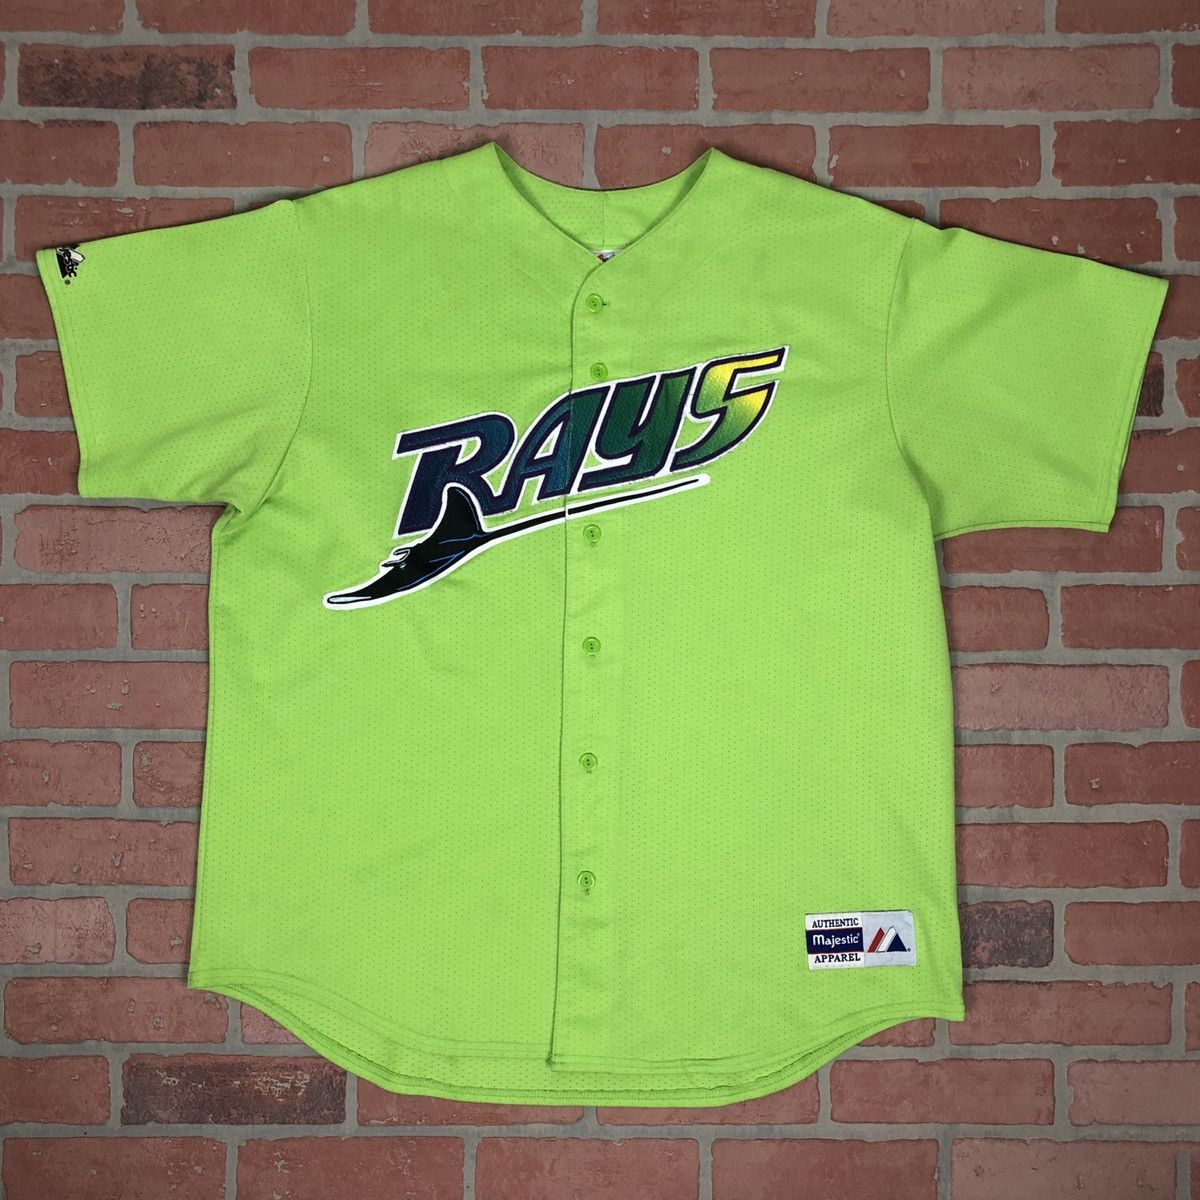 Authentic Devil Rays Jerseys Are $426!? This Is Via Majestic's